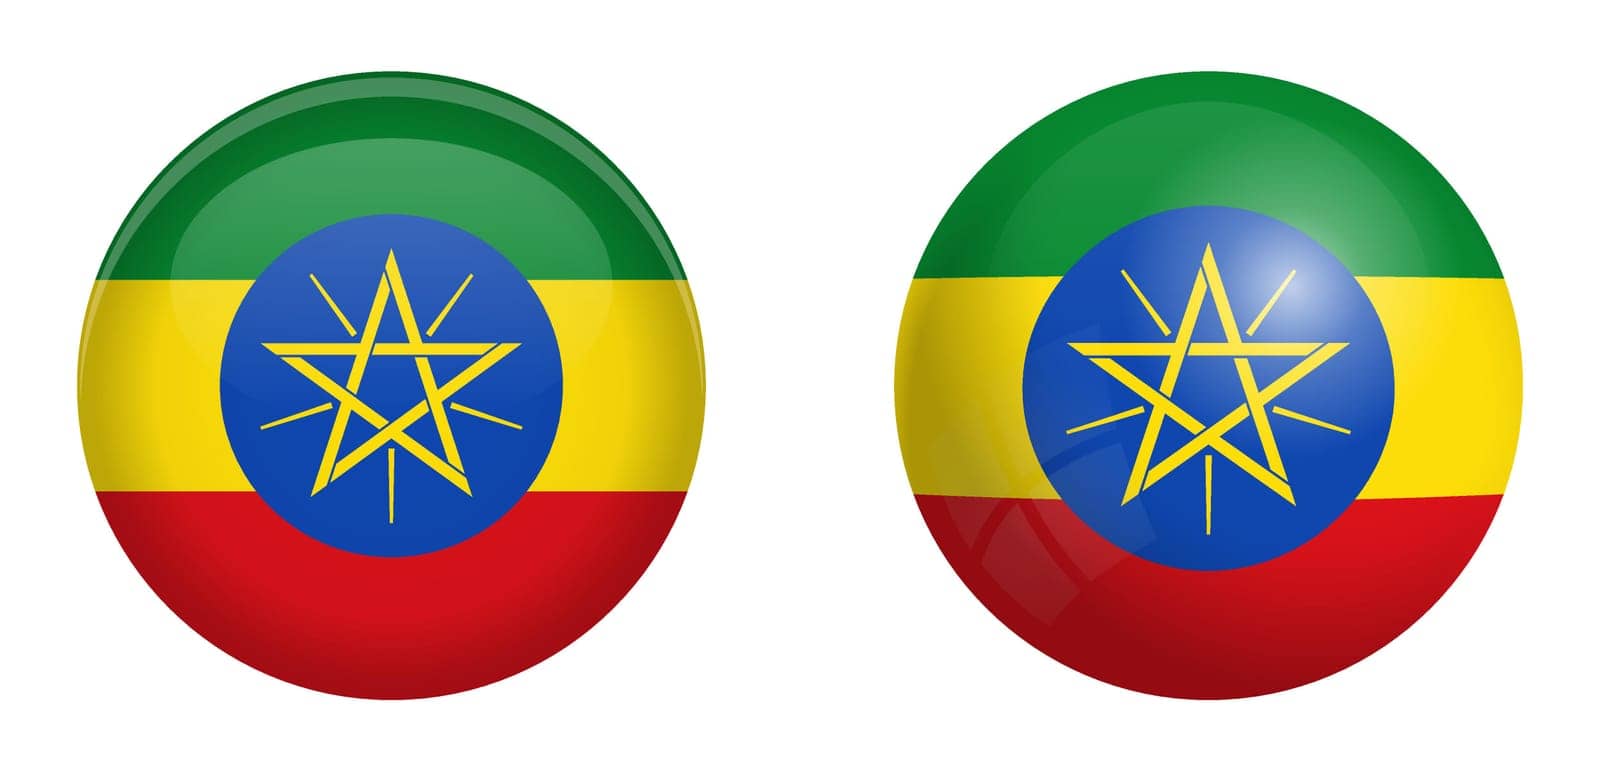 Ethiopia flag under 3d dome button and on glossy sphere / ball.